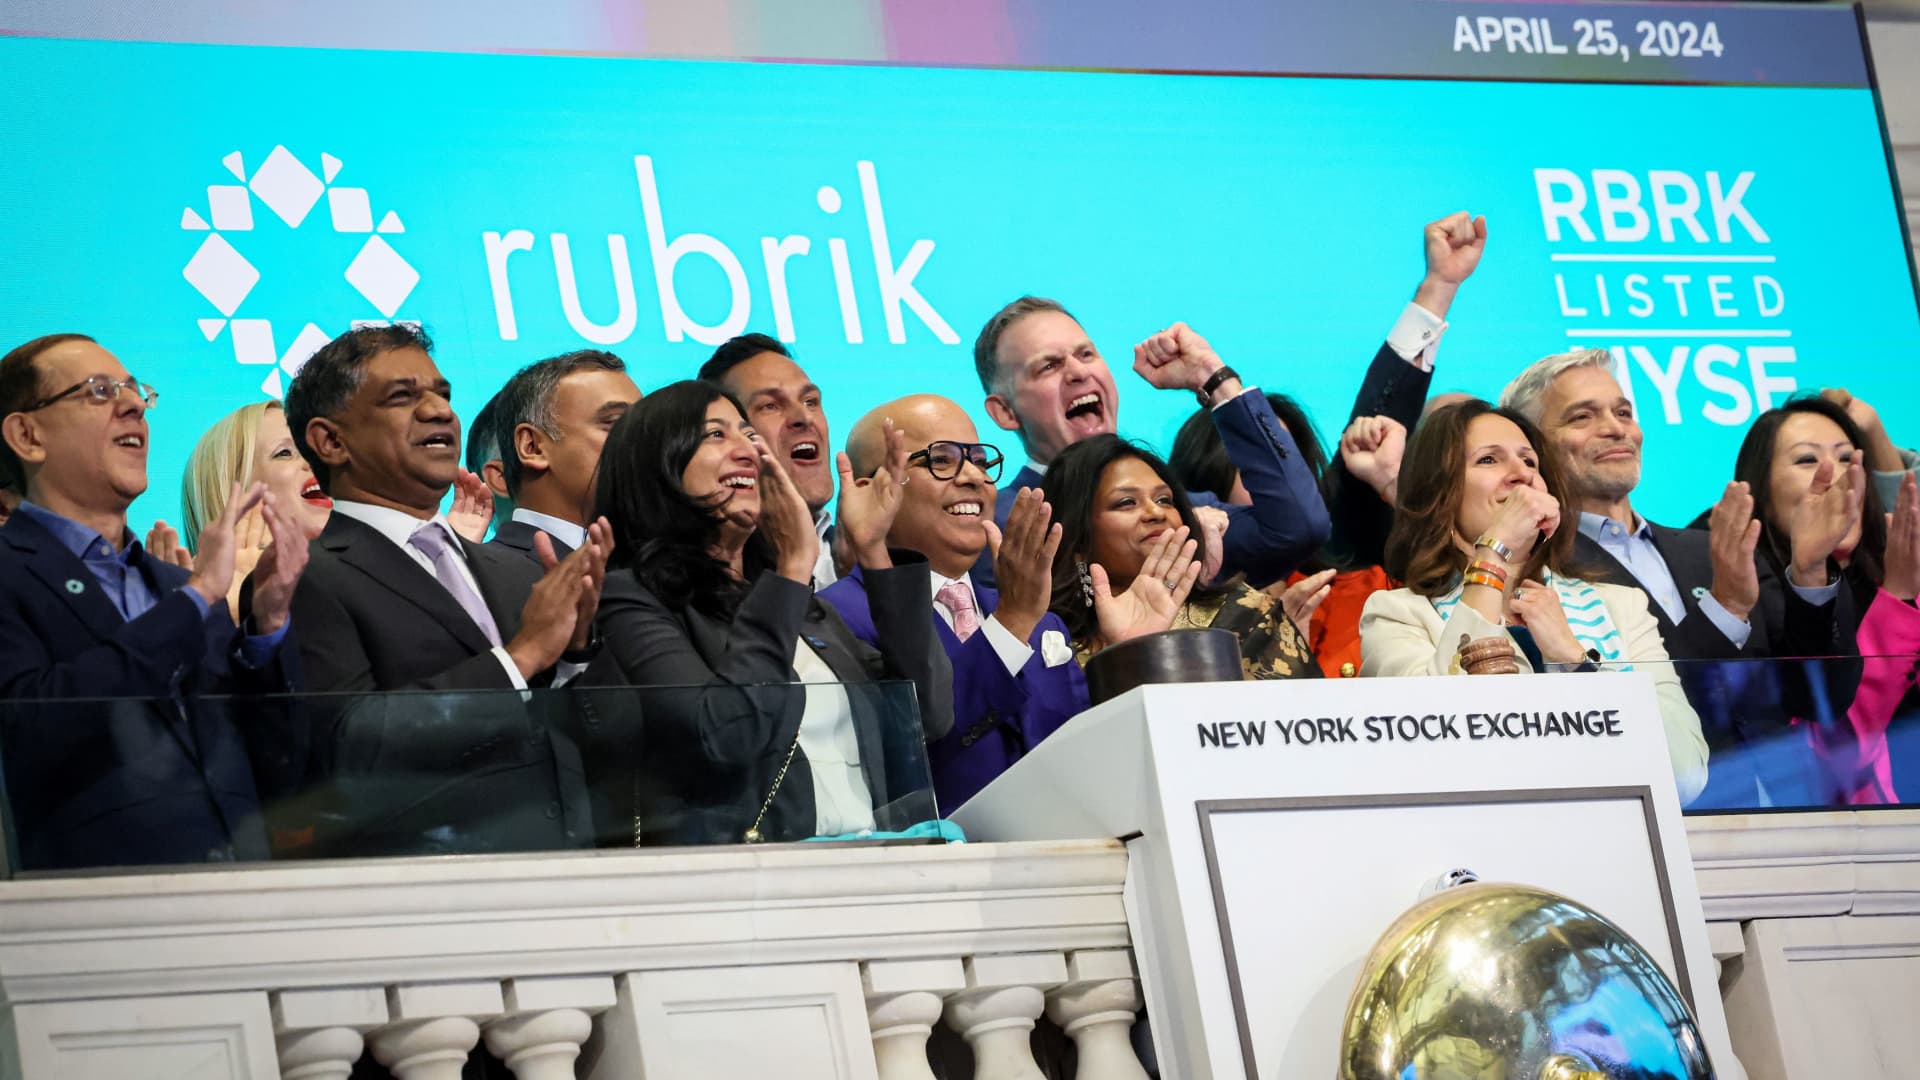 Rubrik stock pops 16% in NYSE debut after company prices IPO above range